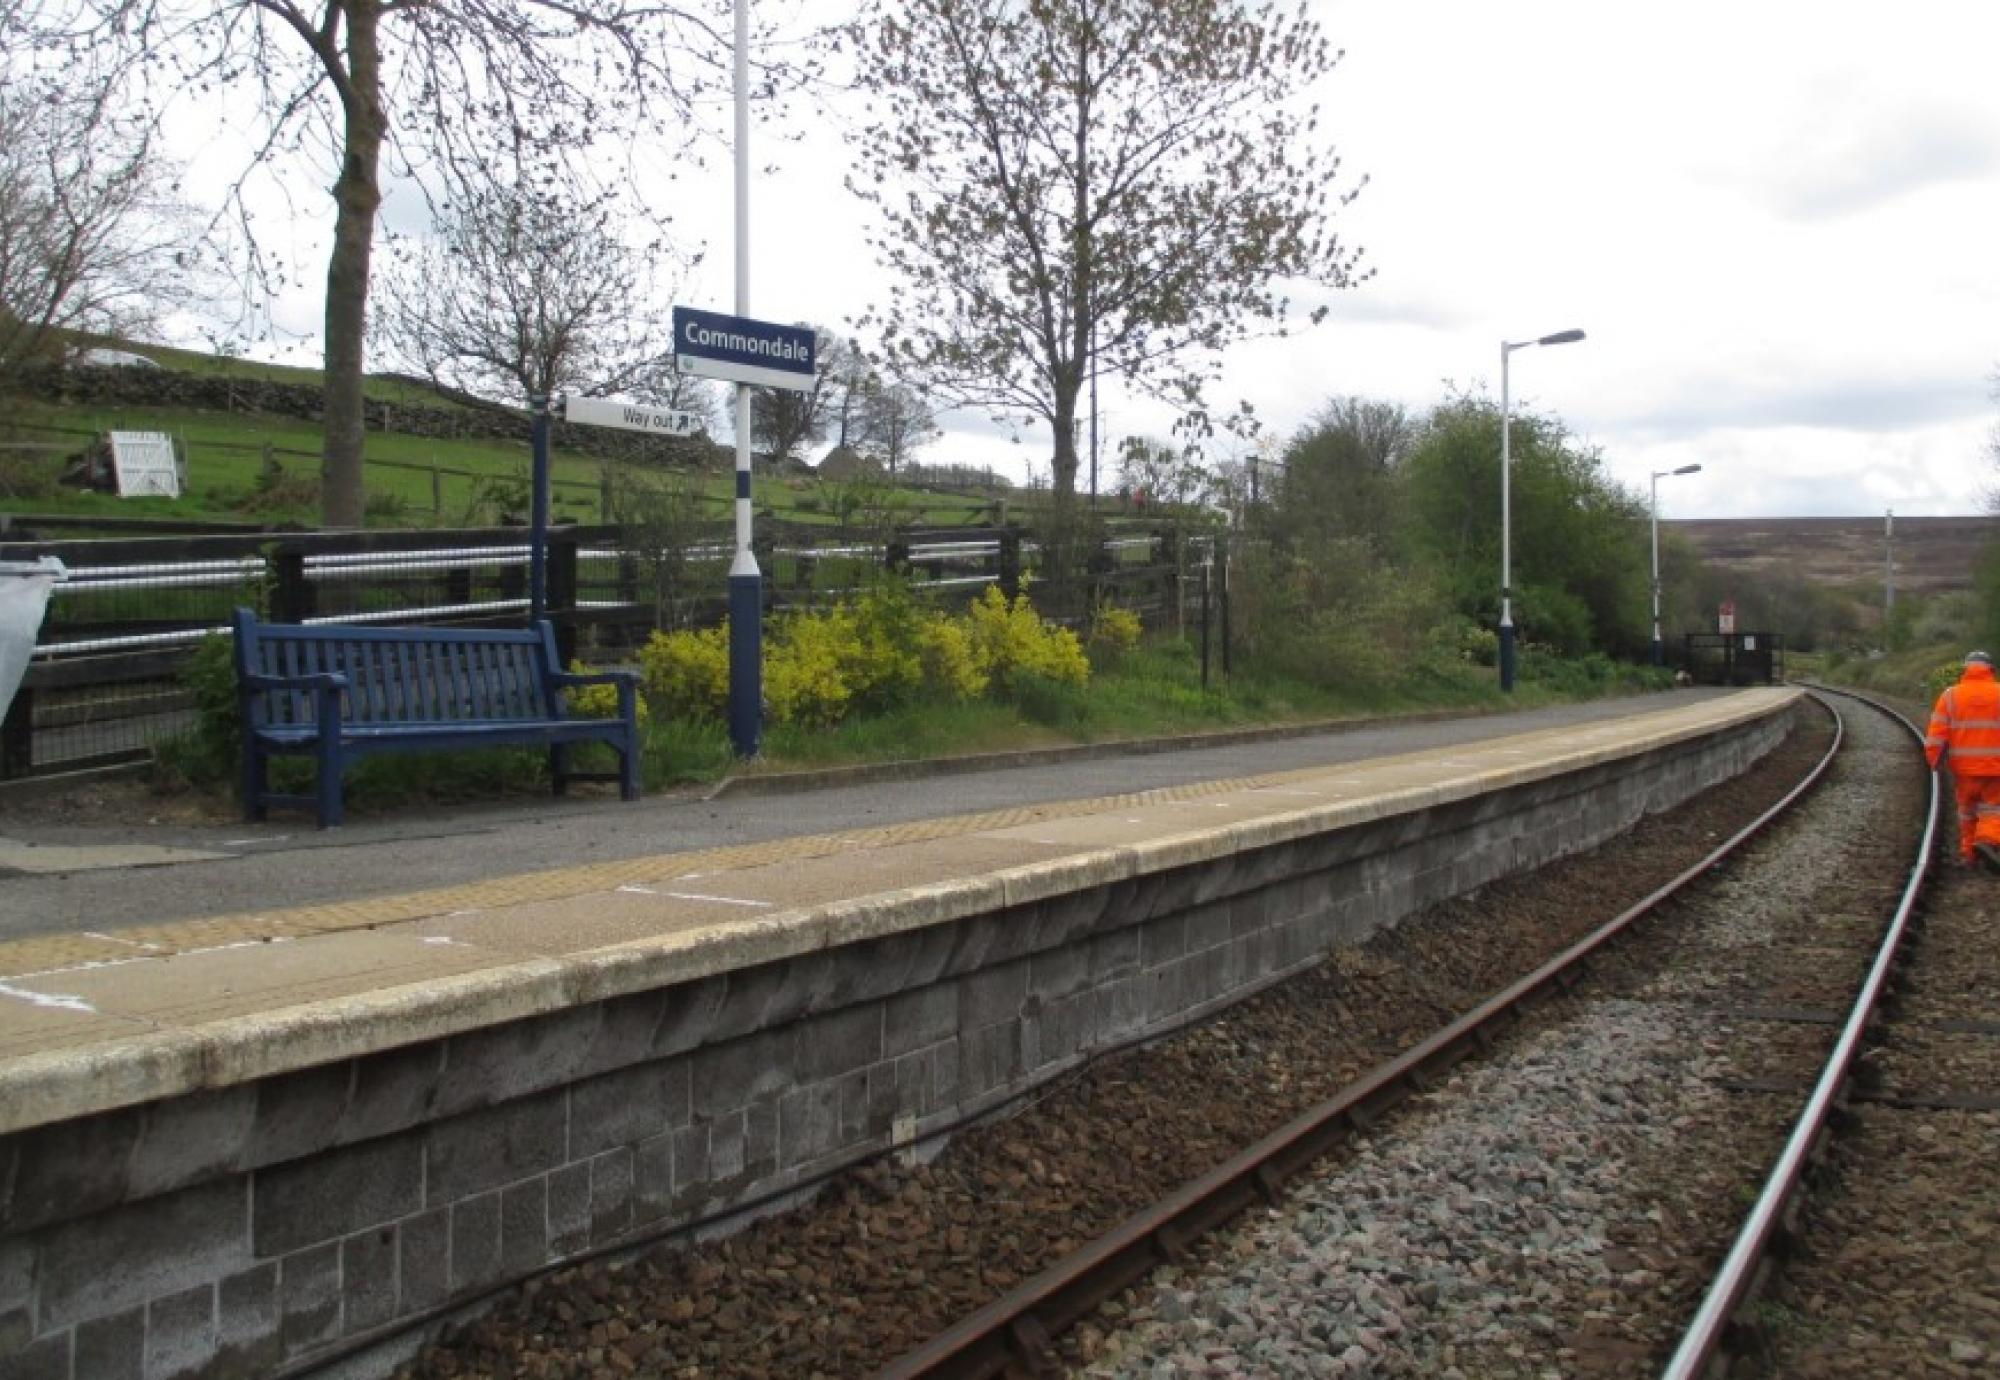 Commondale station 